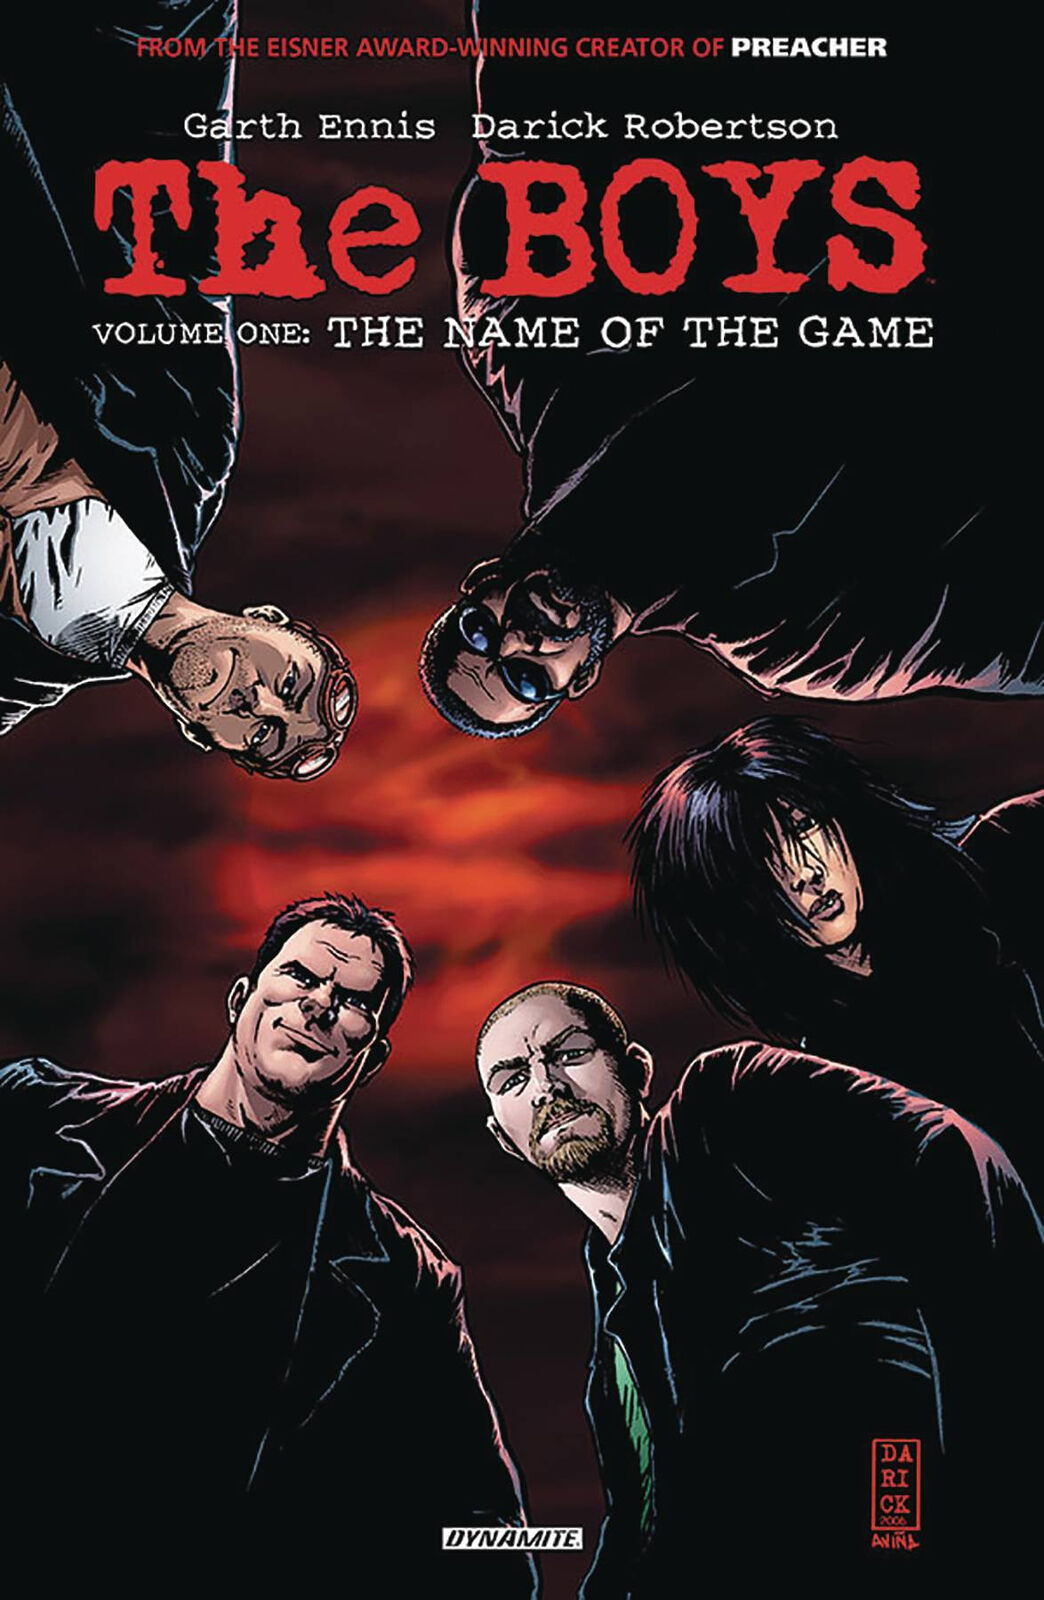 The Boys Vol One: The Name of the Game Trade Paperback